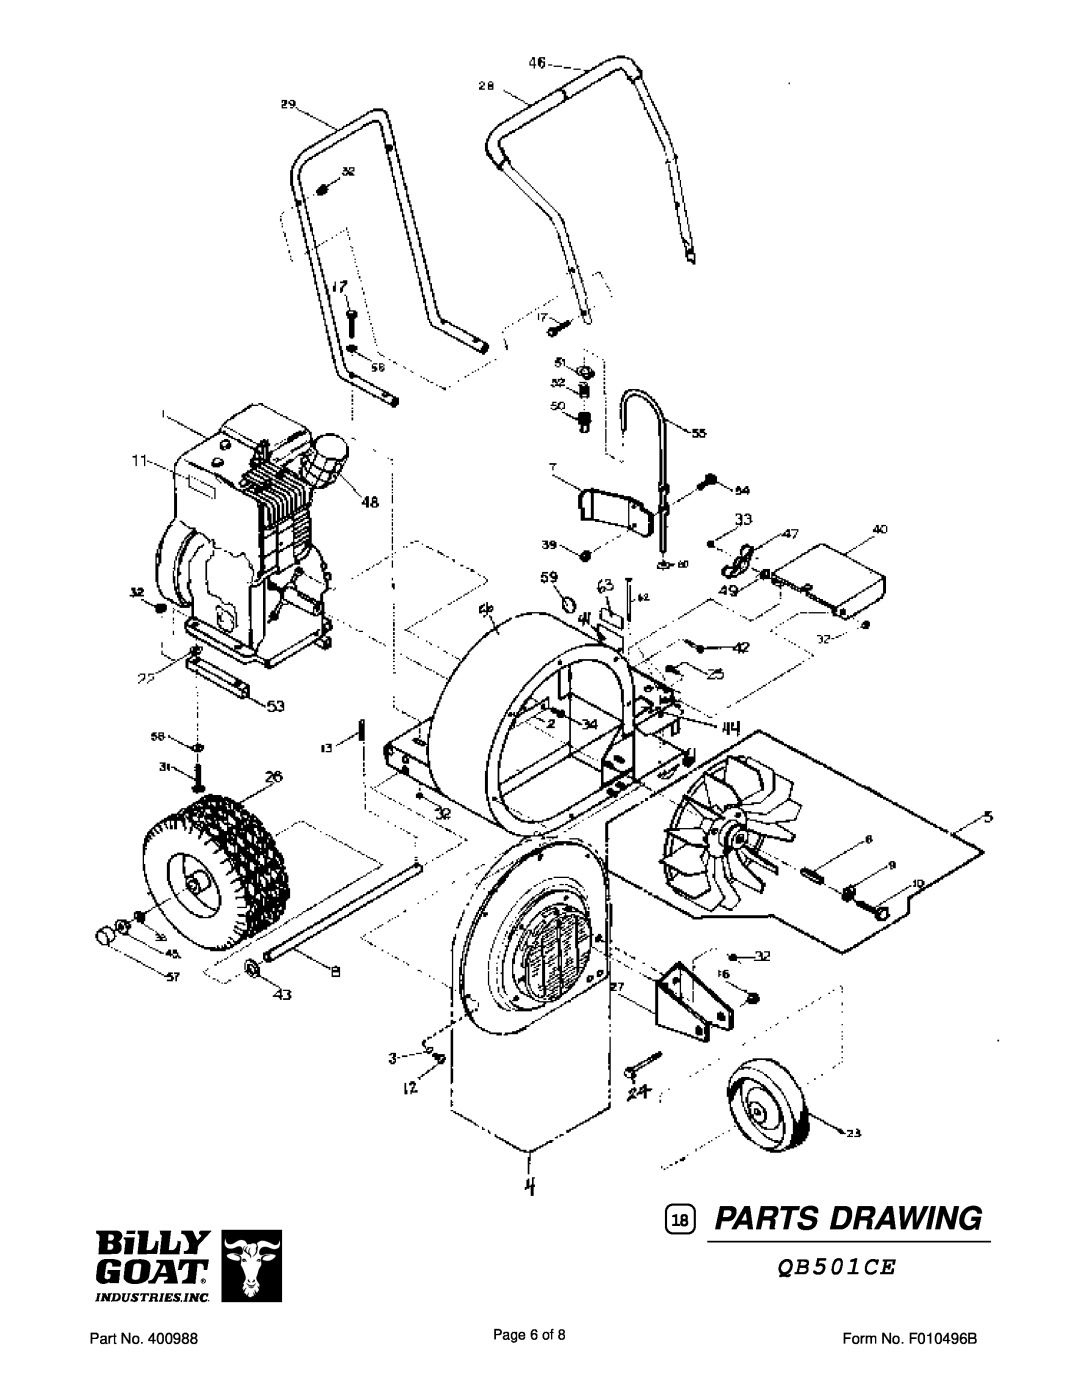 Billy Goat QB501CE owner manual Parts Drawing, Page 6 of, Form No. F010496B 